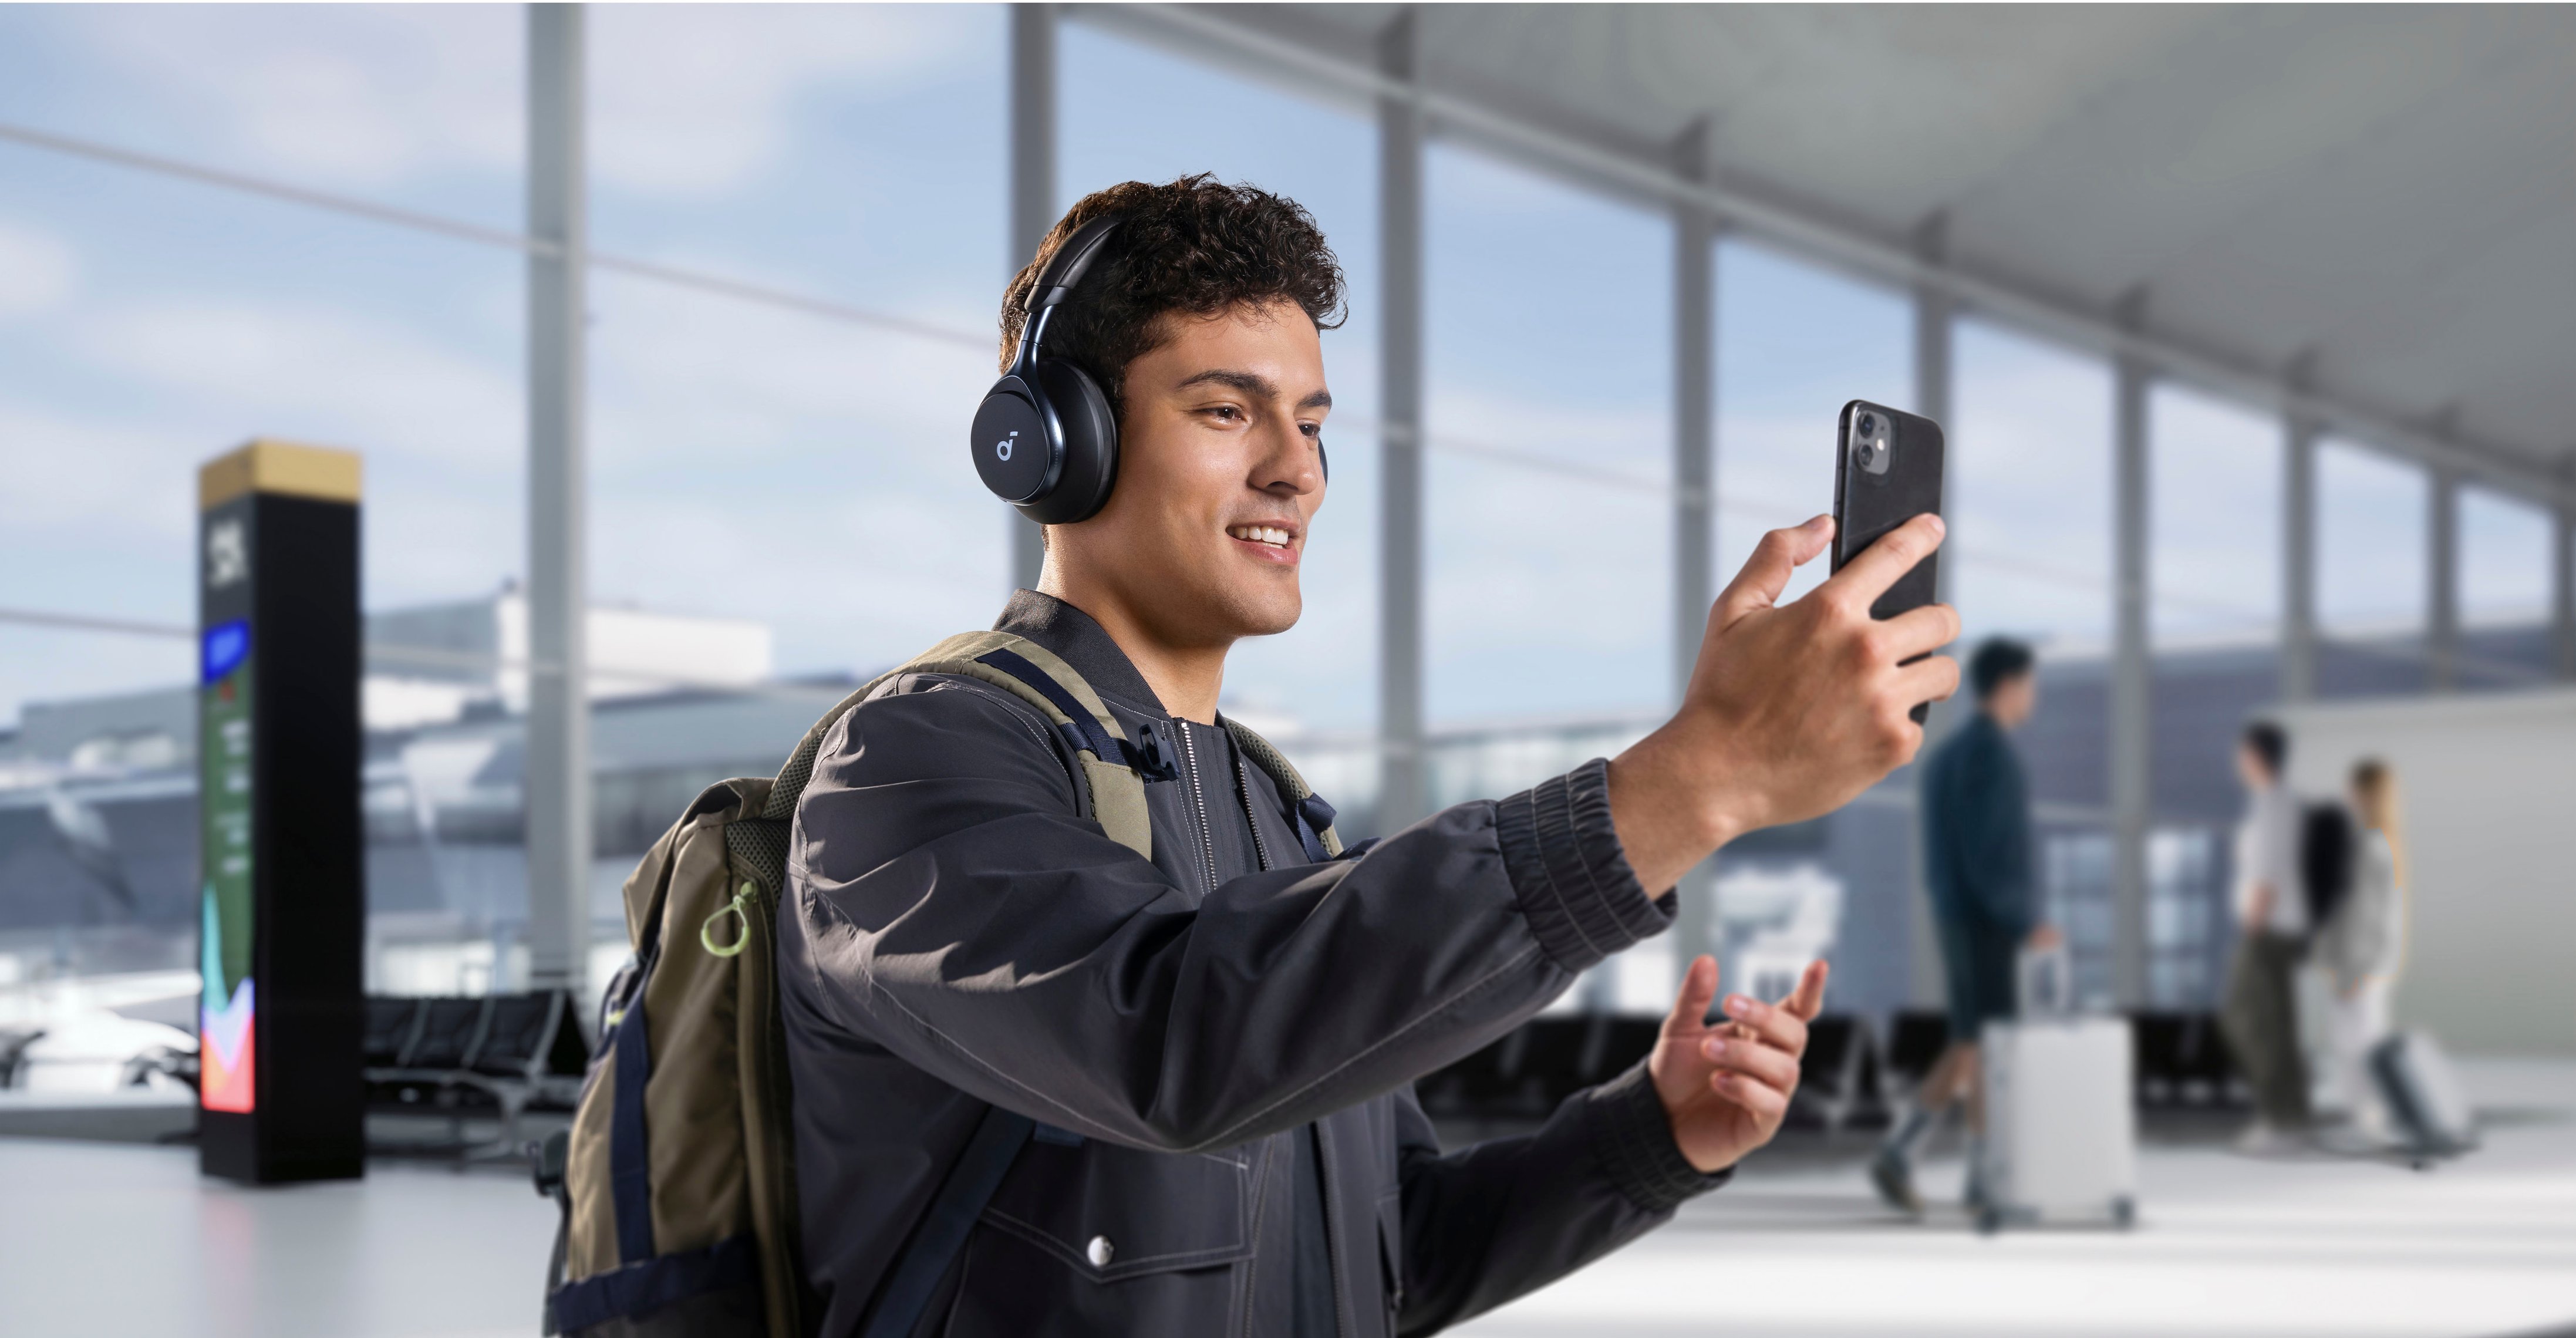 soundcore By Anker- Space One Bluetooth Over-Ear Headphones, AANC, Up to  60-Hrs of Playtime , 3D SS